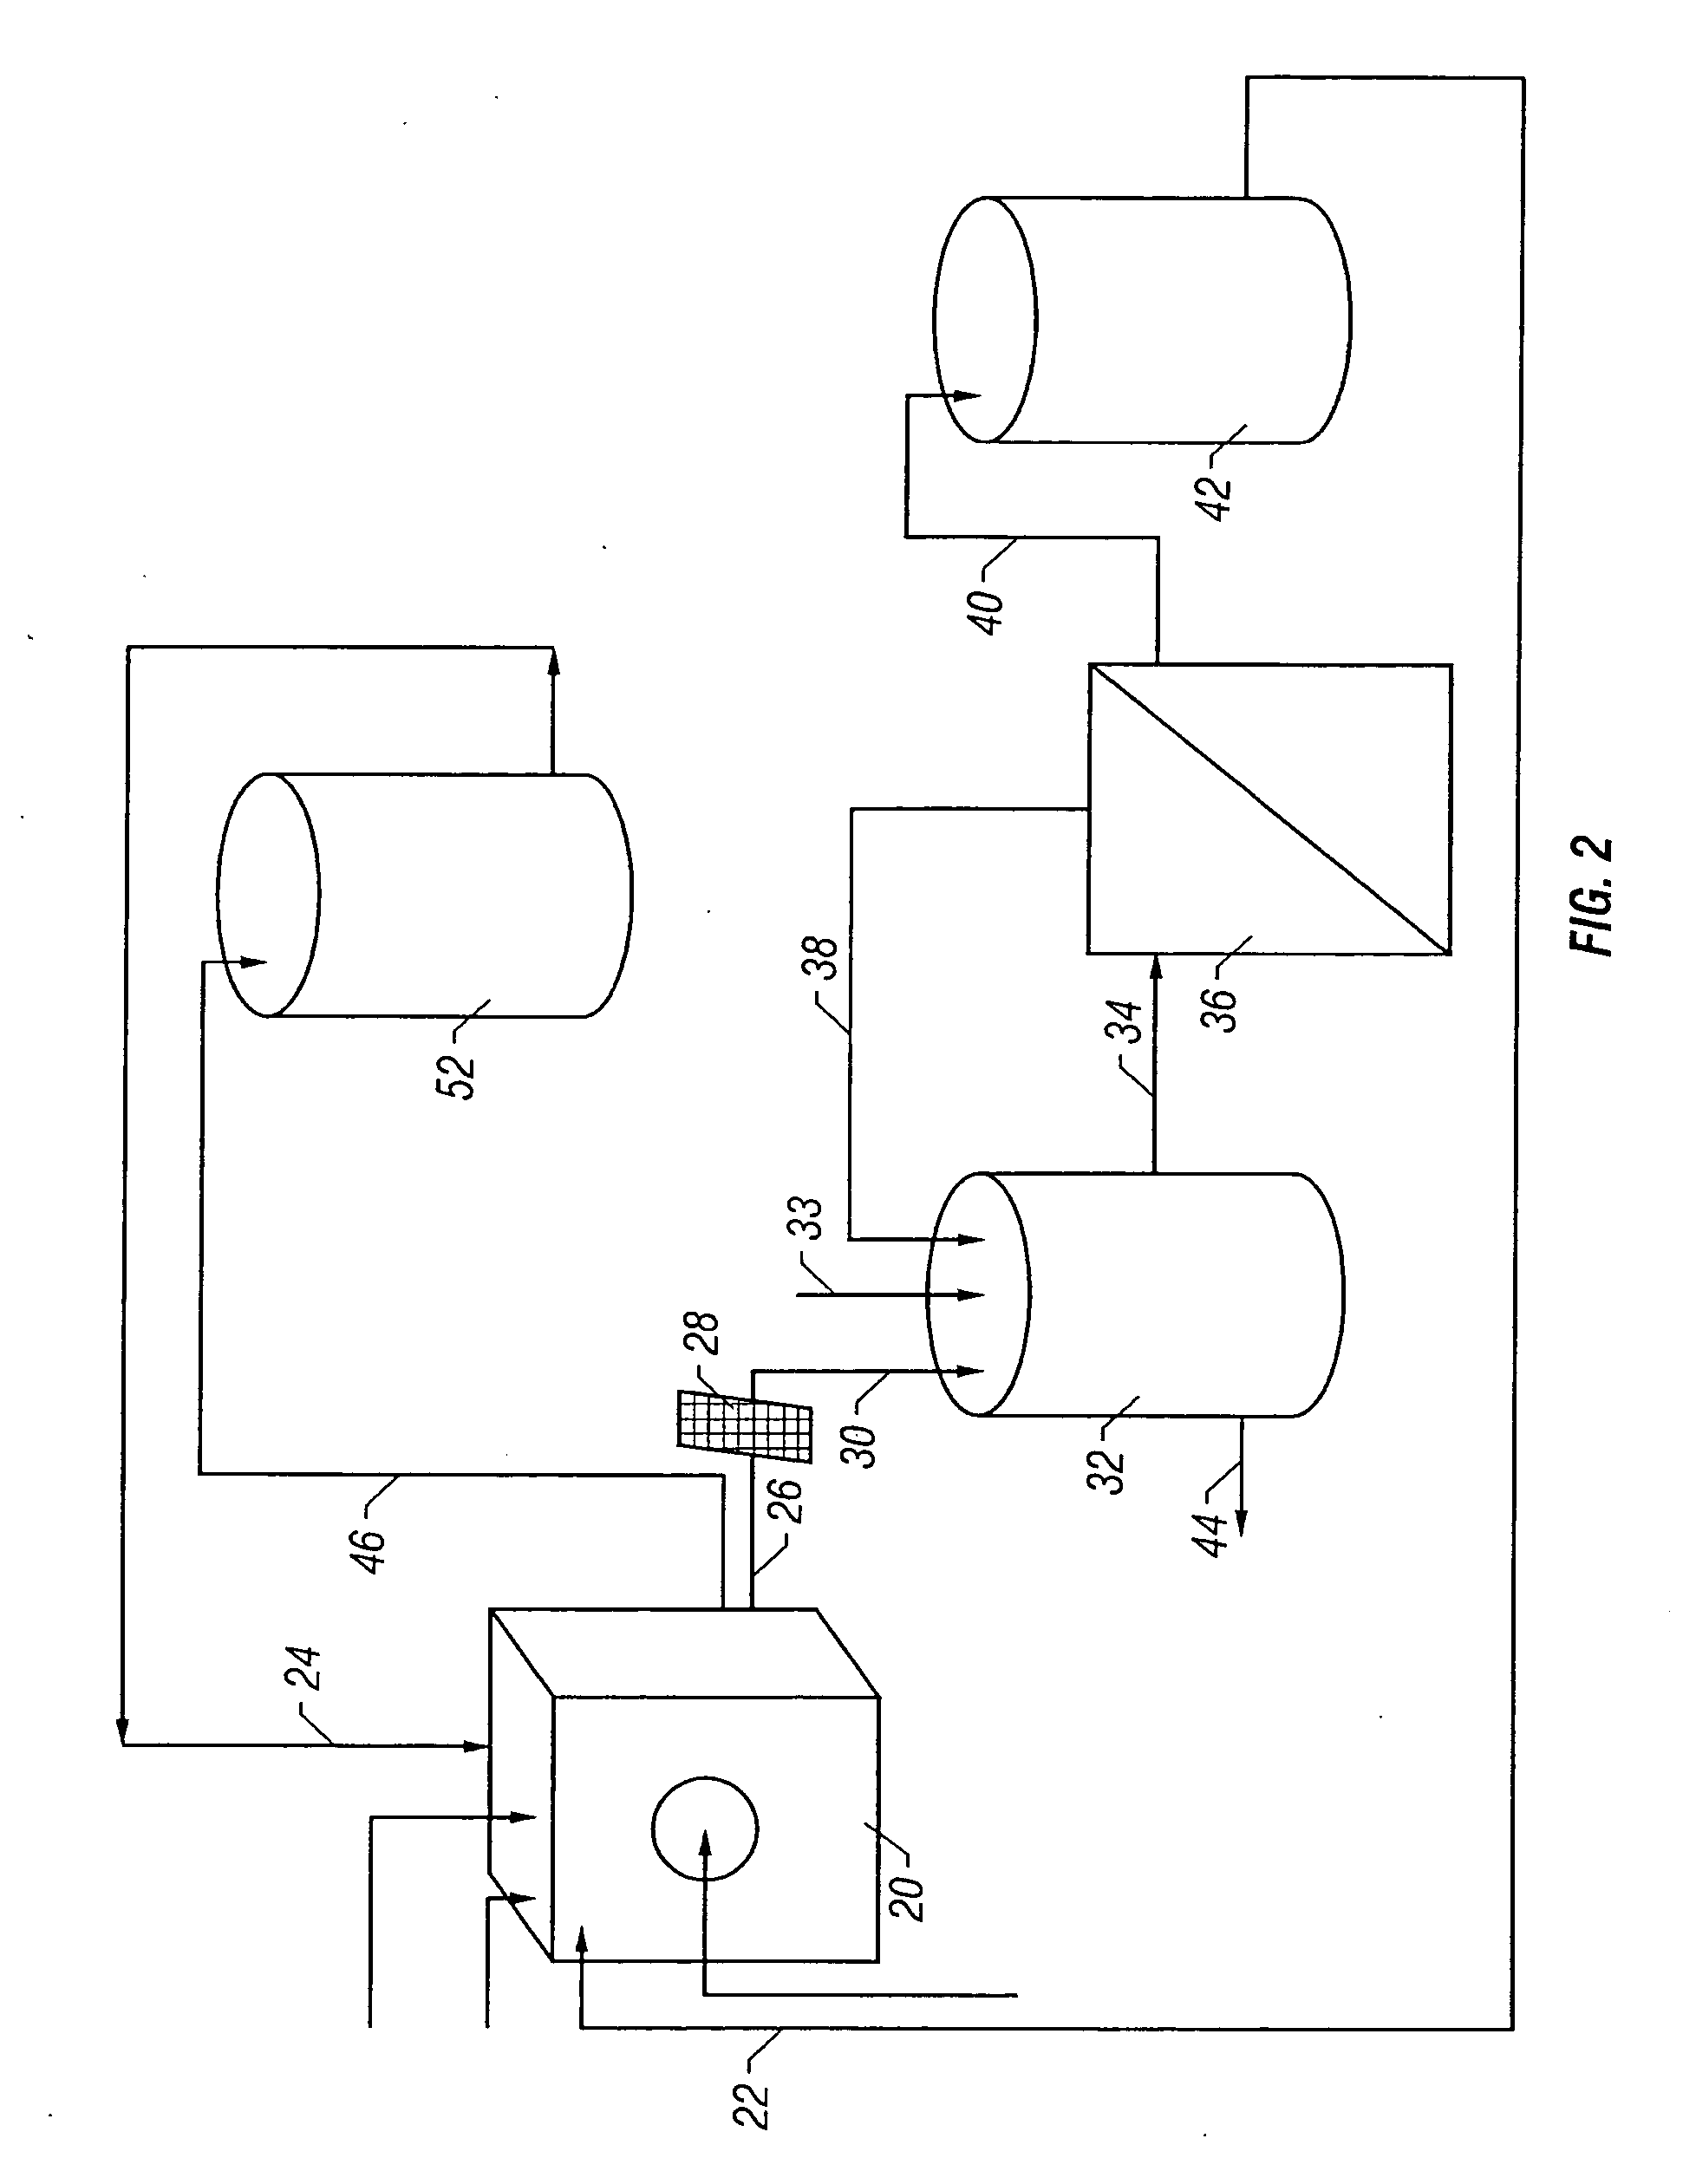 Method for economically viable and environmentally friendly central processing of home laundry